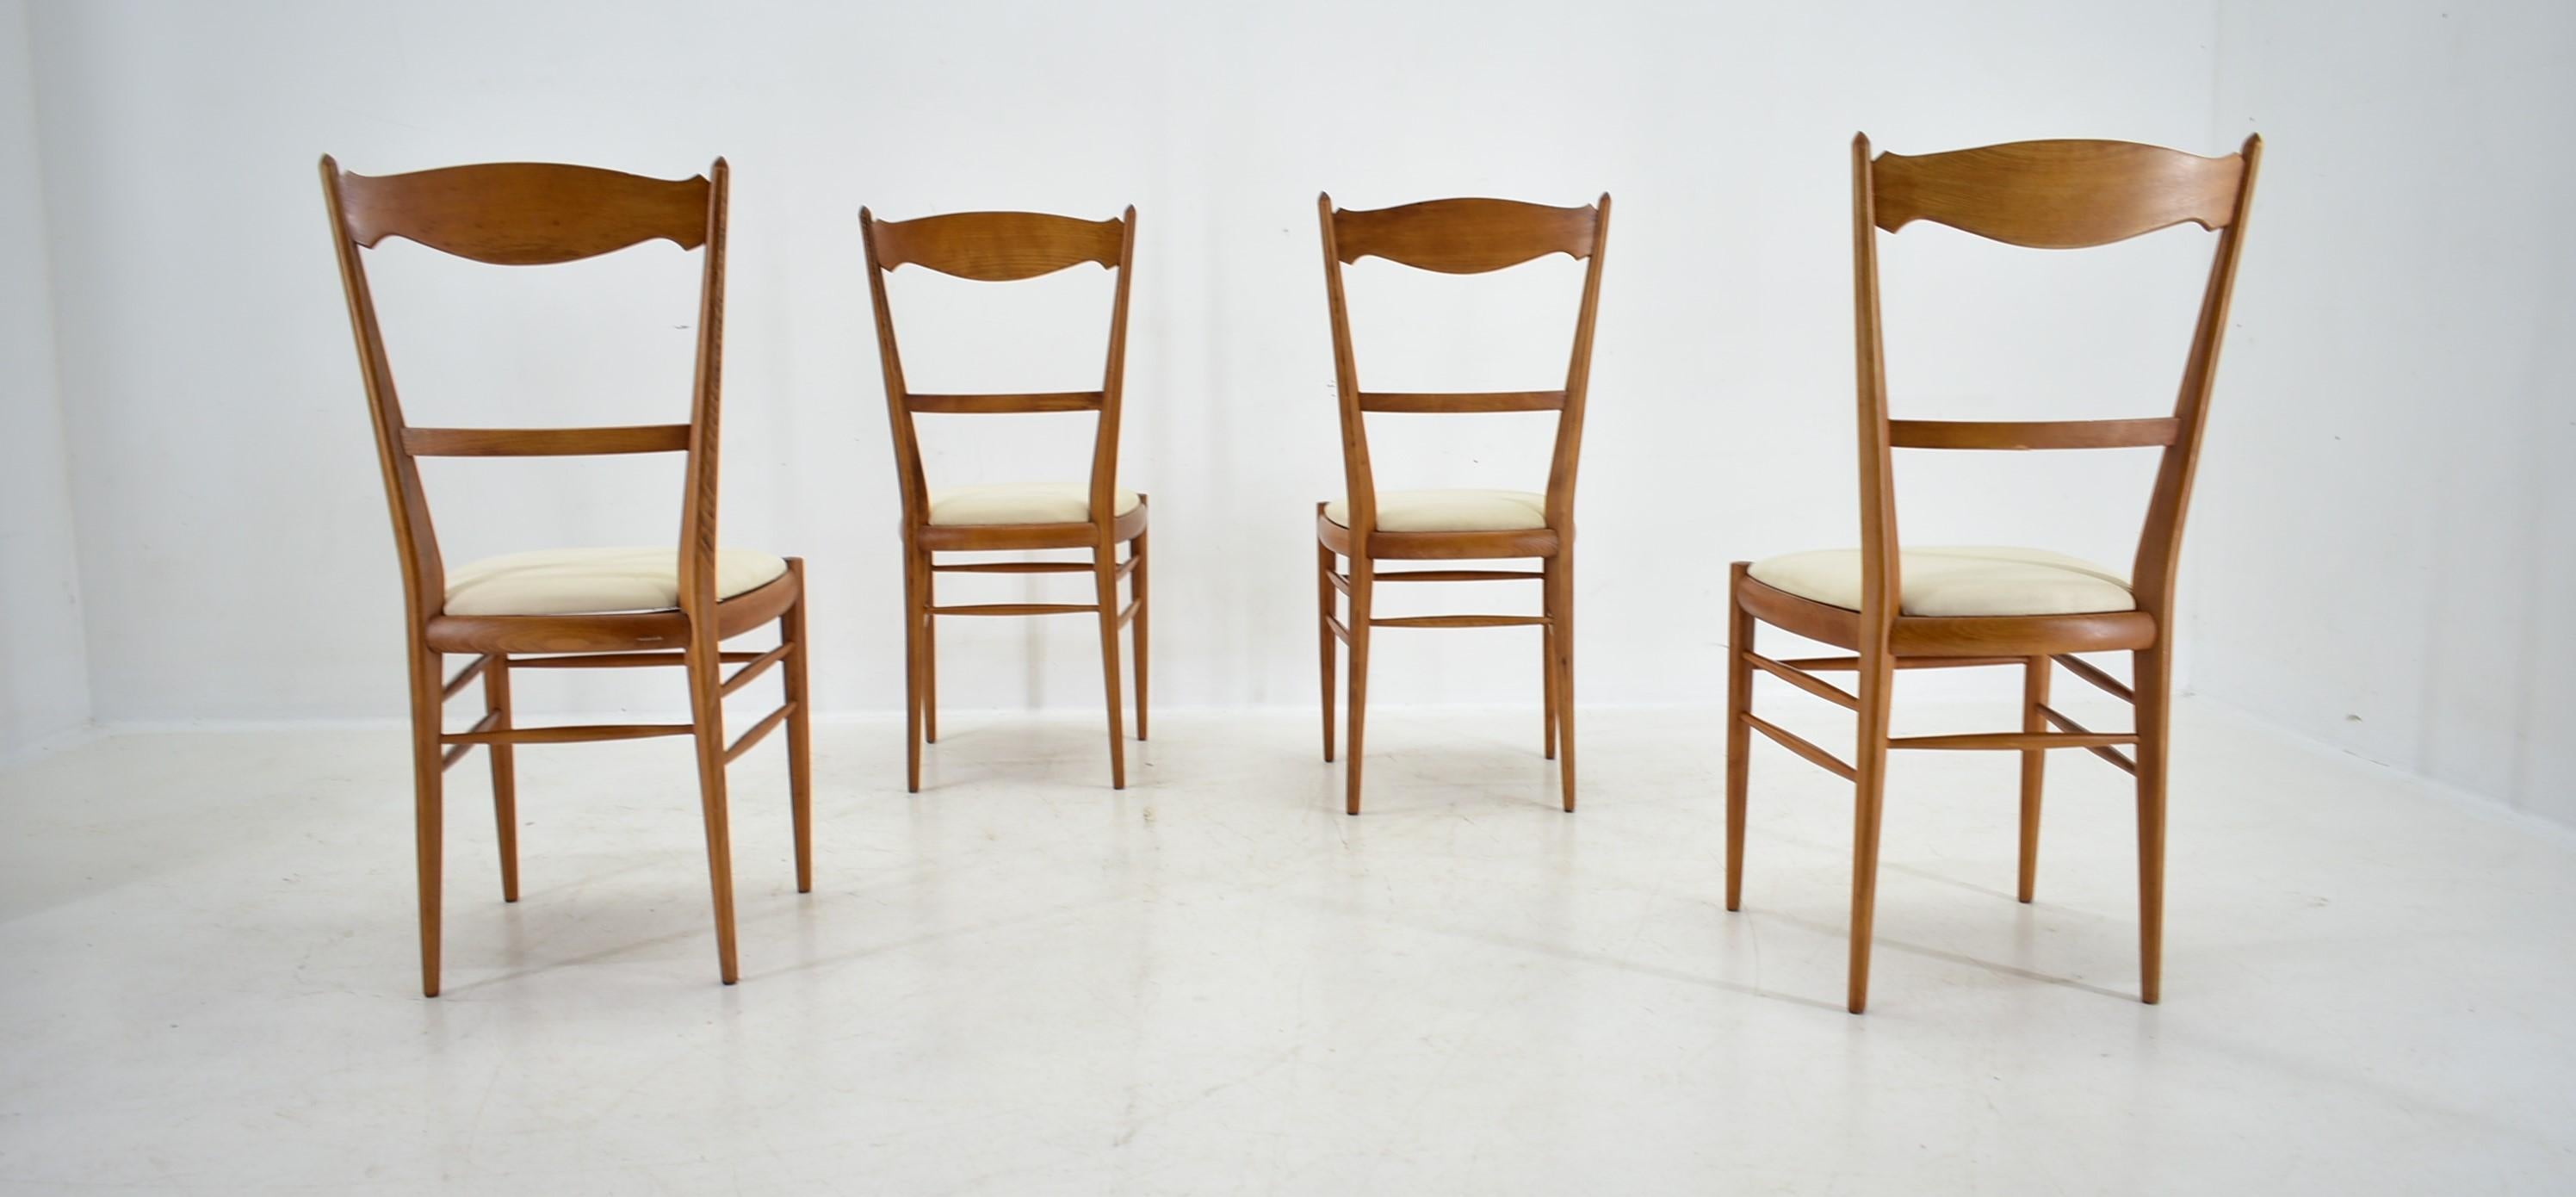 1970s Set of 4 Dining Chairs by Drevotvar, Czechoslovakia For Sale 6